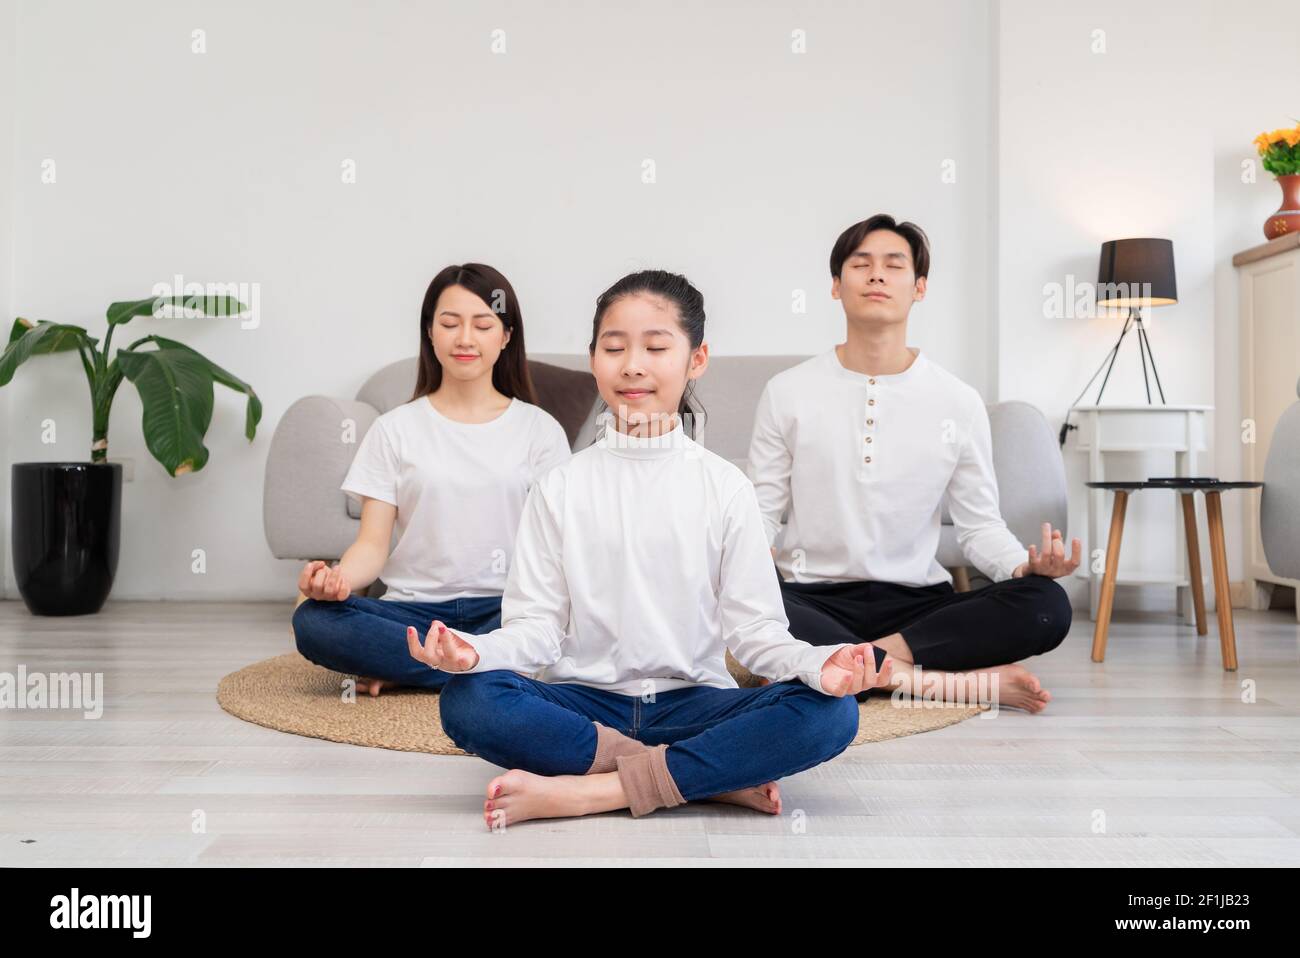 Young Asian family doing exercise together at home Stock Photo